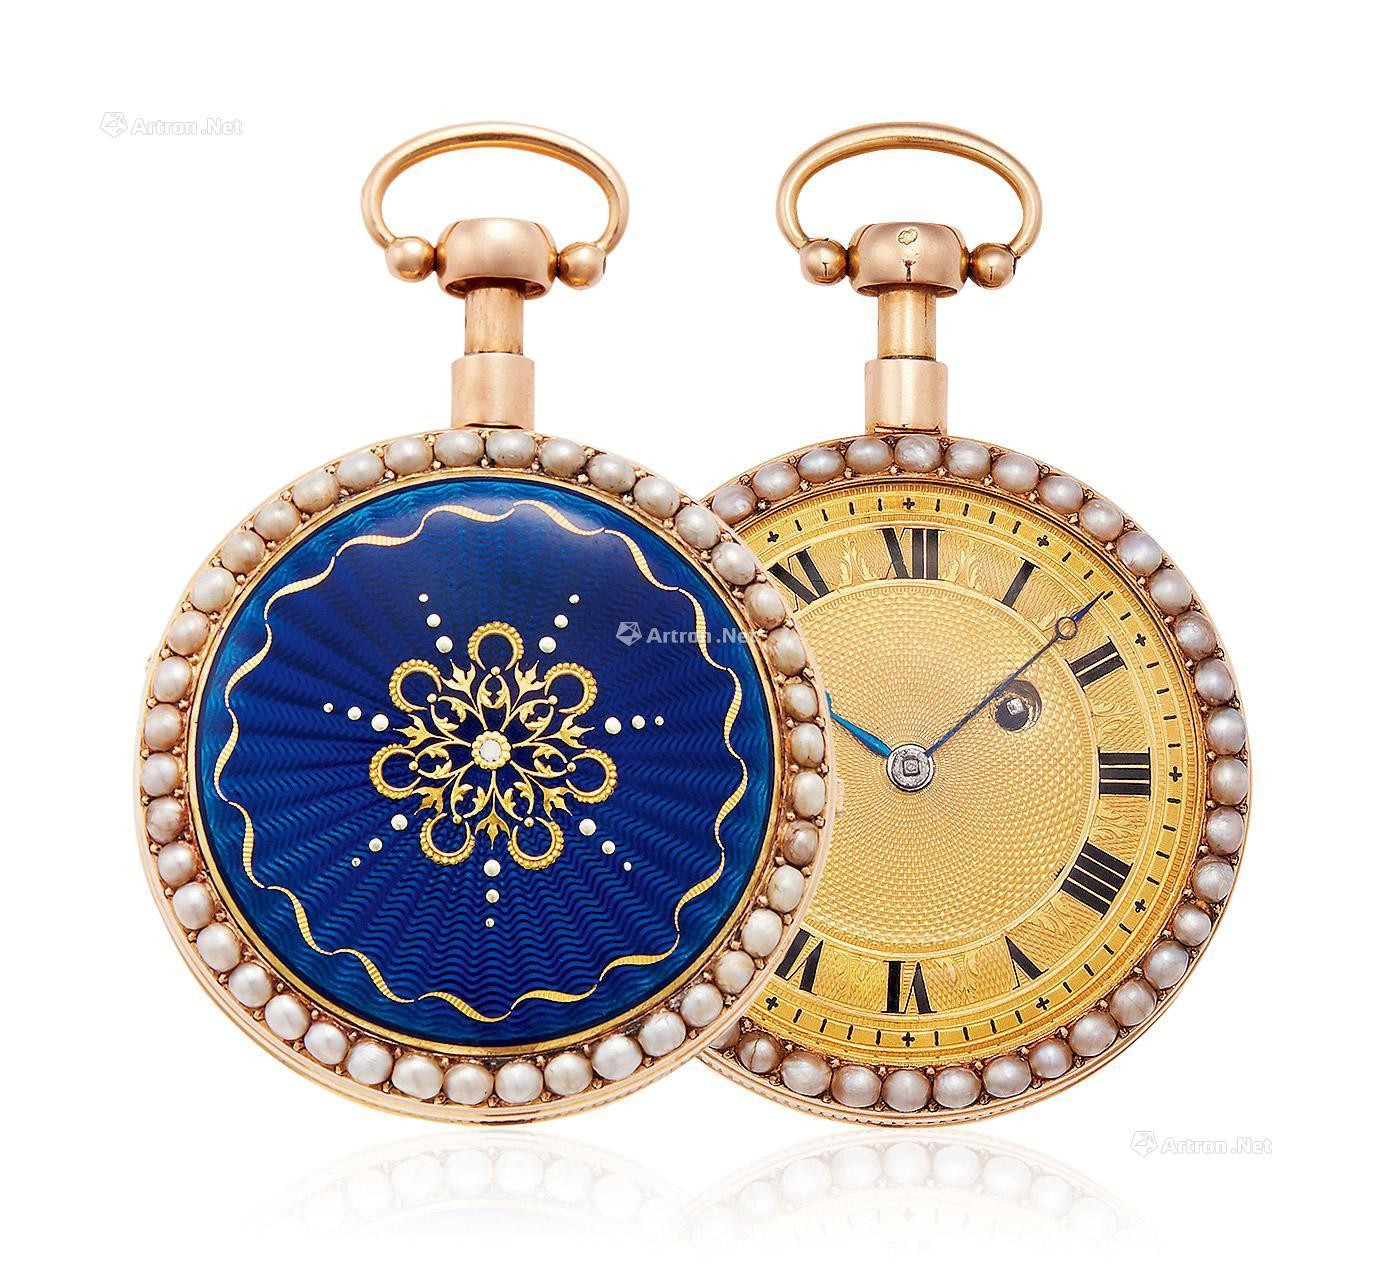 FRANCE A YELLOE GOLD OPEN-FACED MANUALLY-WOUND POCKET WATCH WITH PEAEL-SET AND ENAMEL CASE AND QUARTER REPEATING